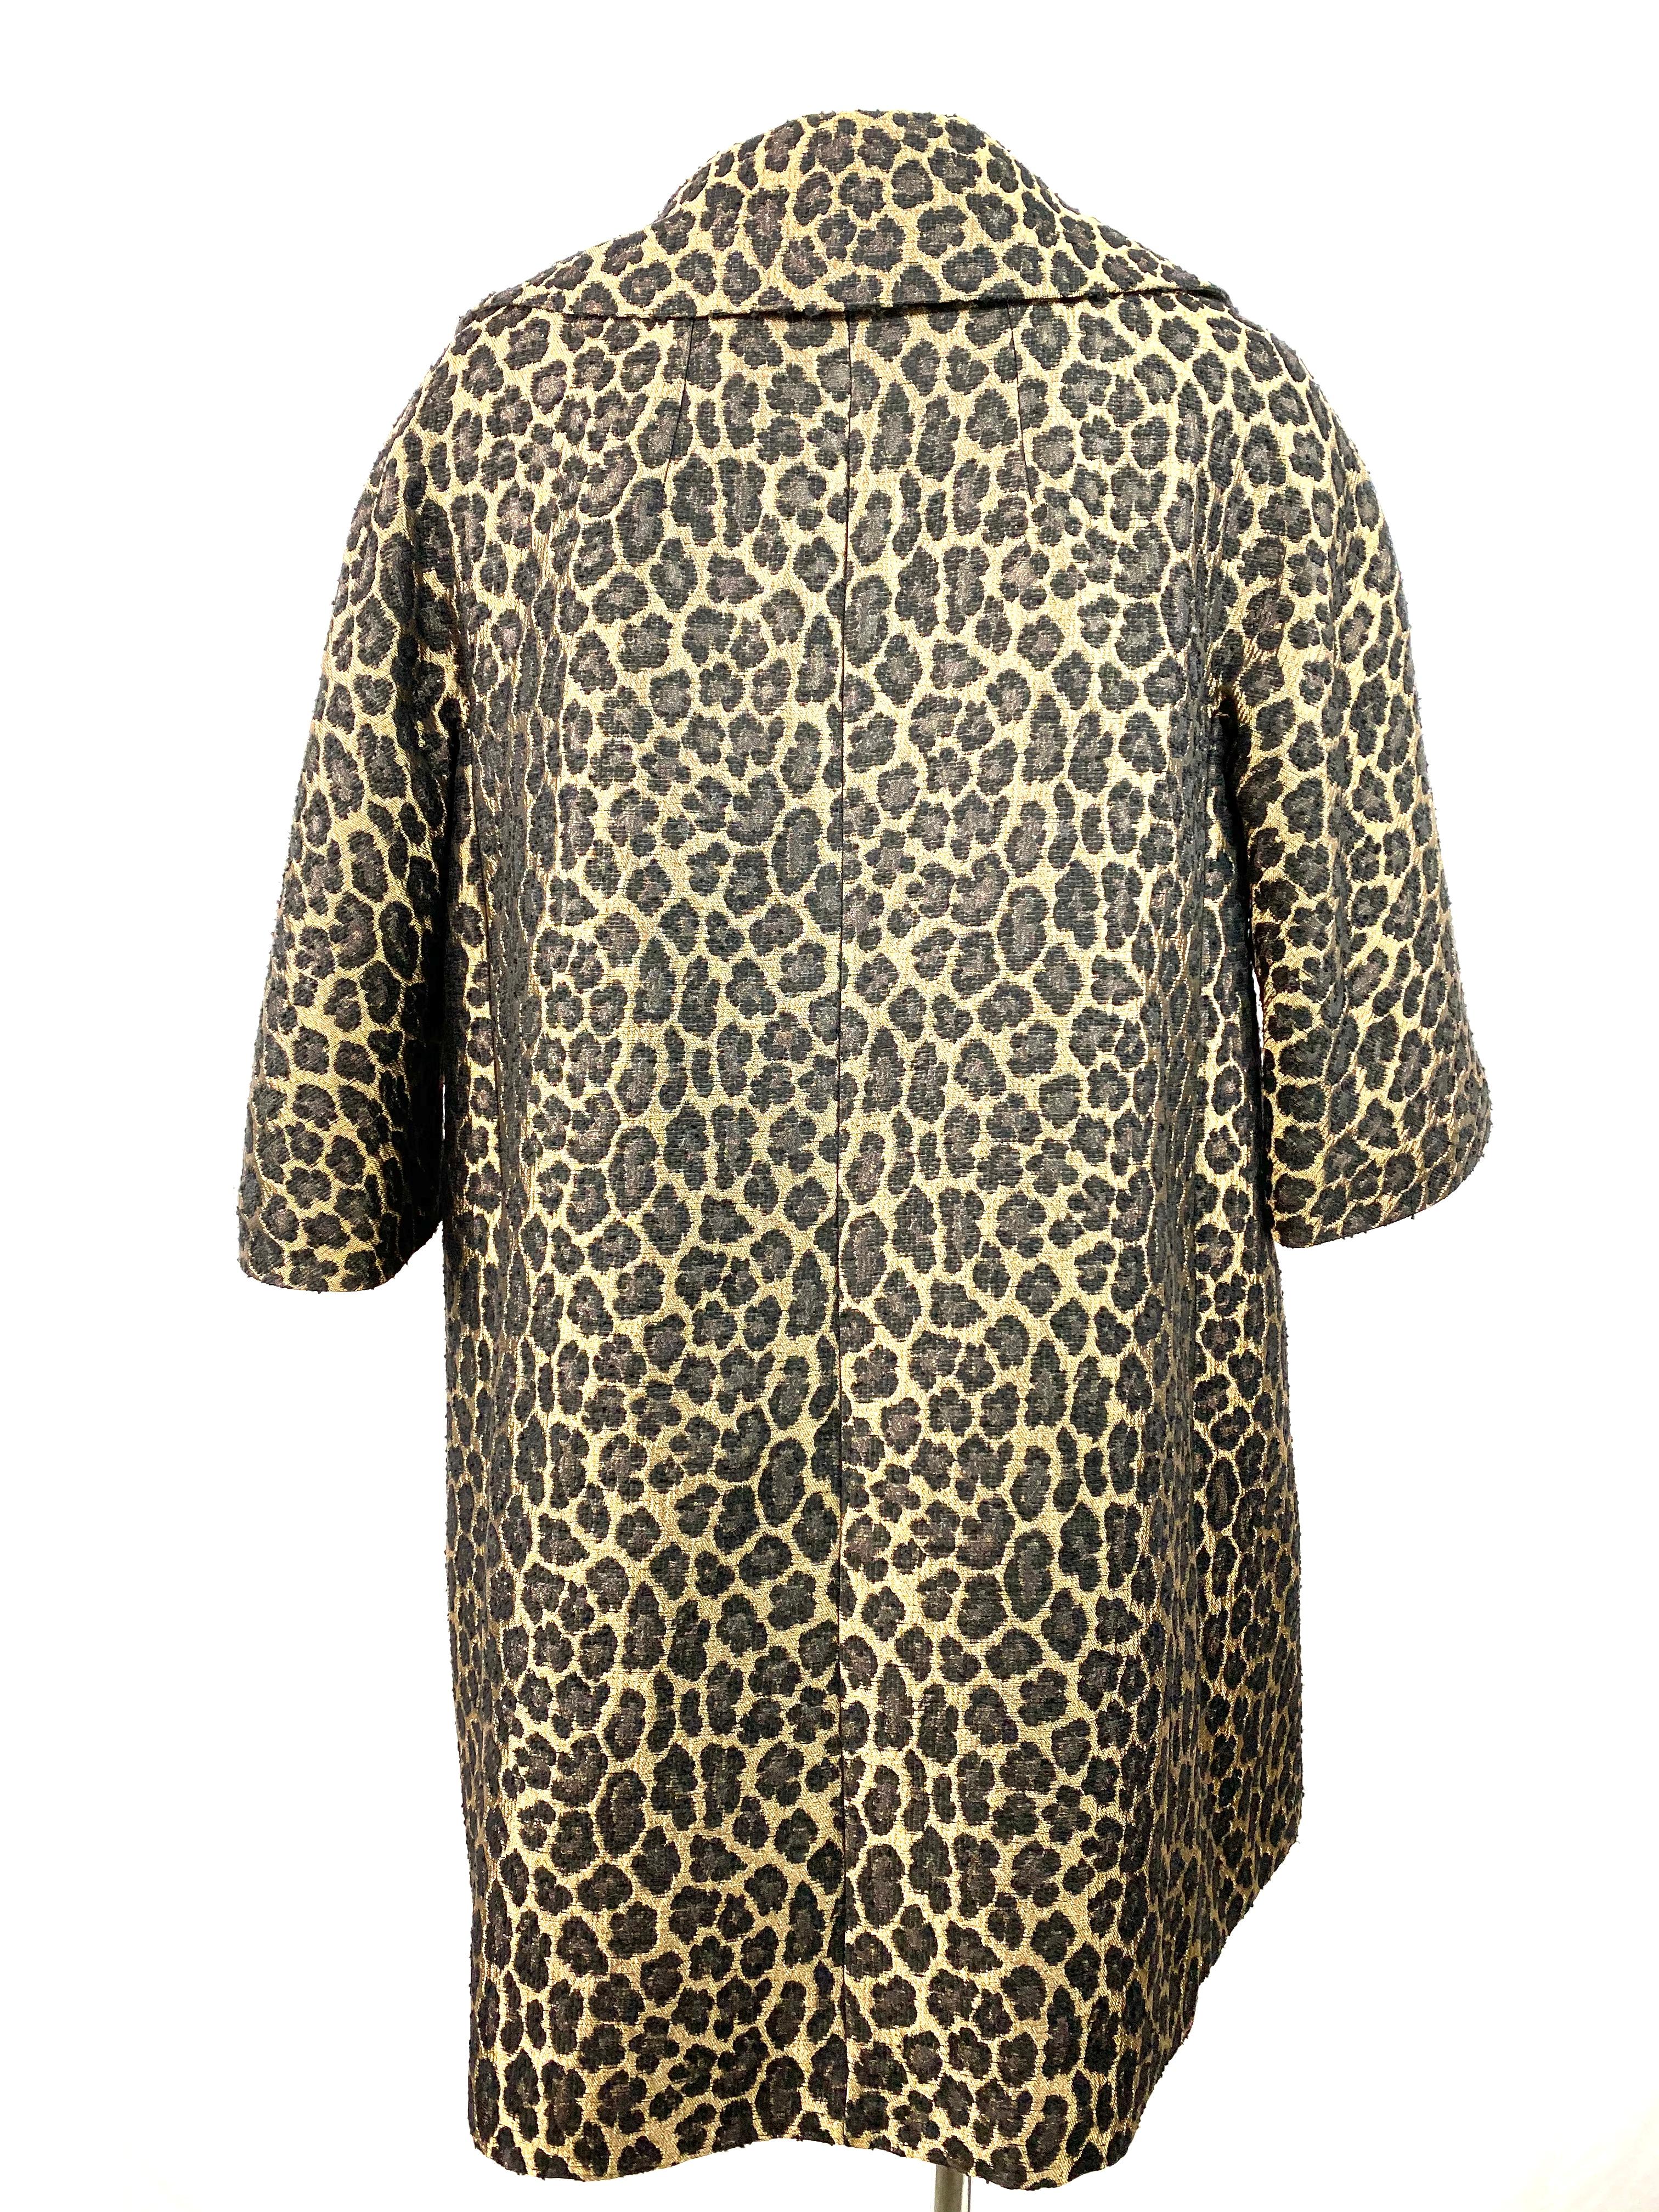 Erika Cavallini Semi- Couture Animal Print Coat  In Excellent Condition For Sale In Beverly Hills, CA